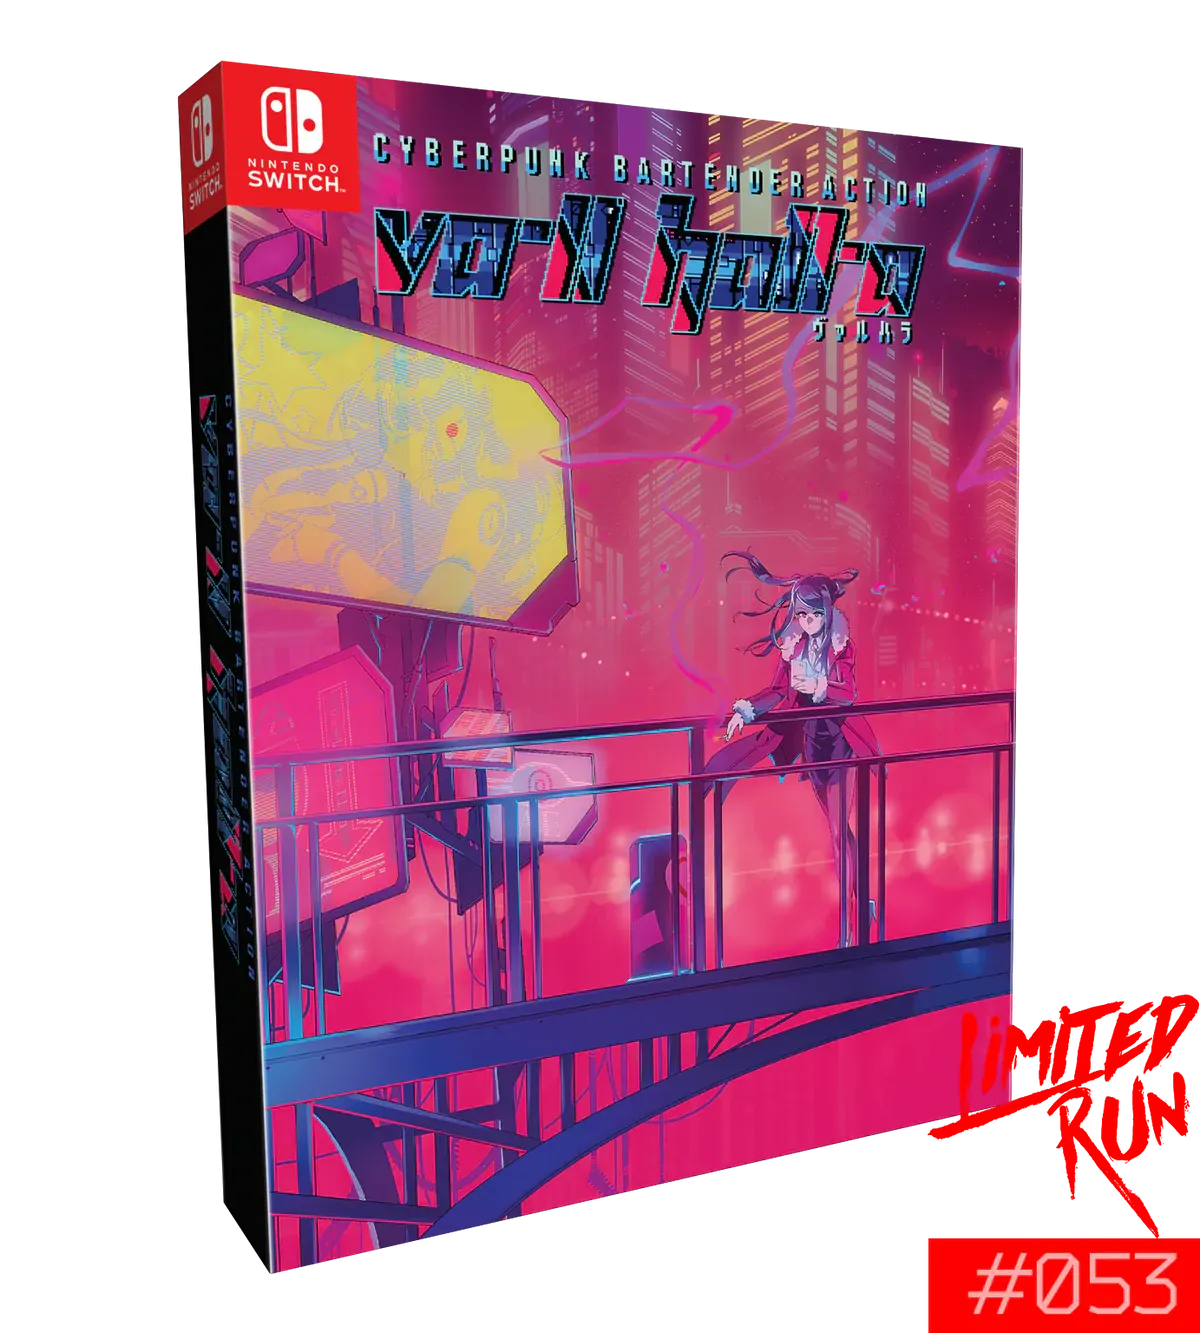 VA-11 HALL-A [Collector's Edition] Video Game